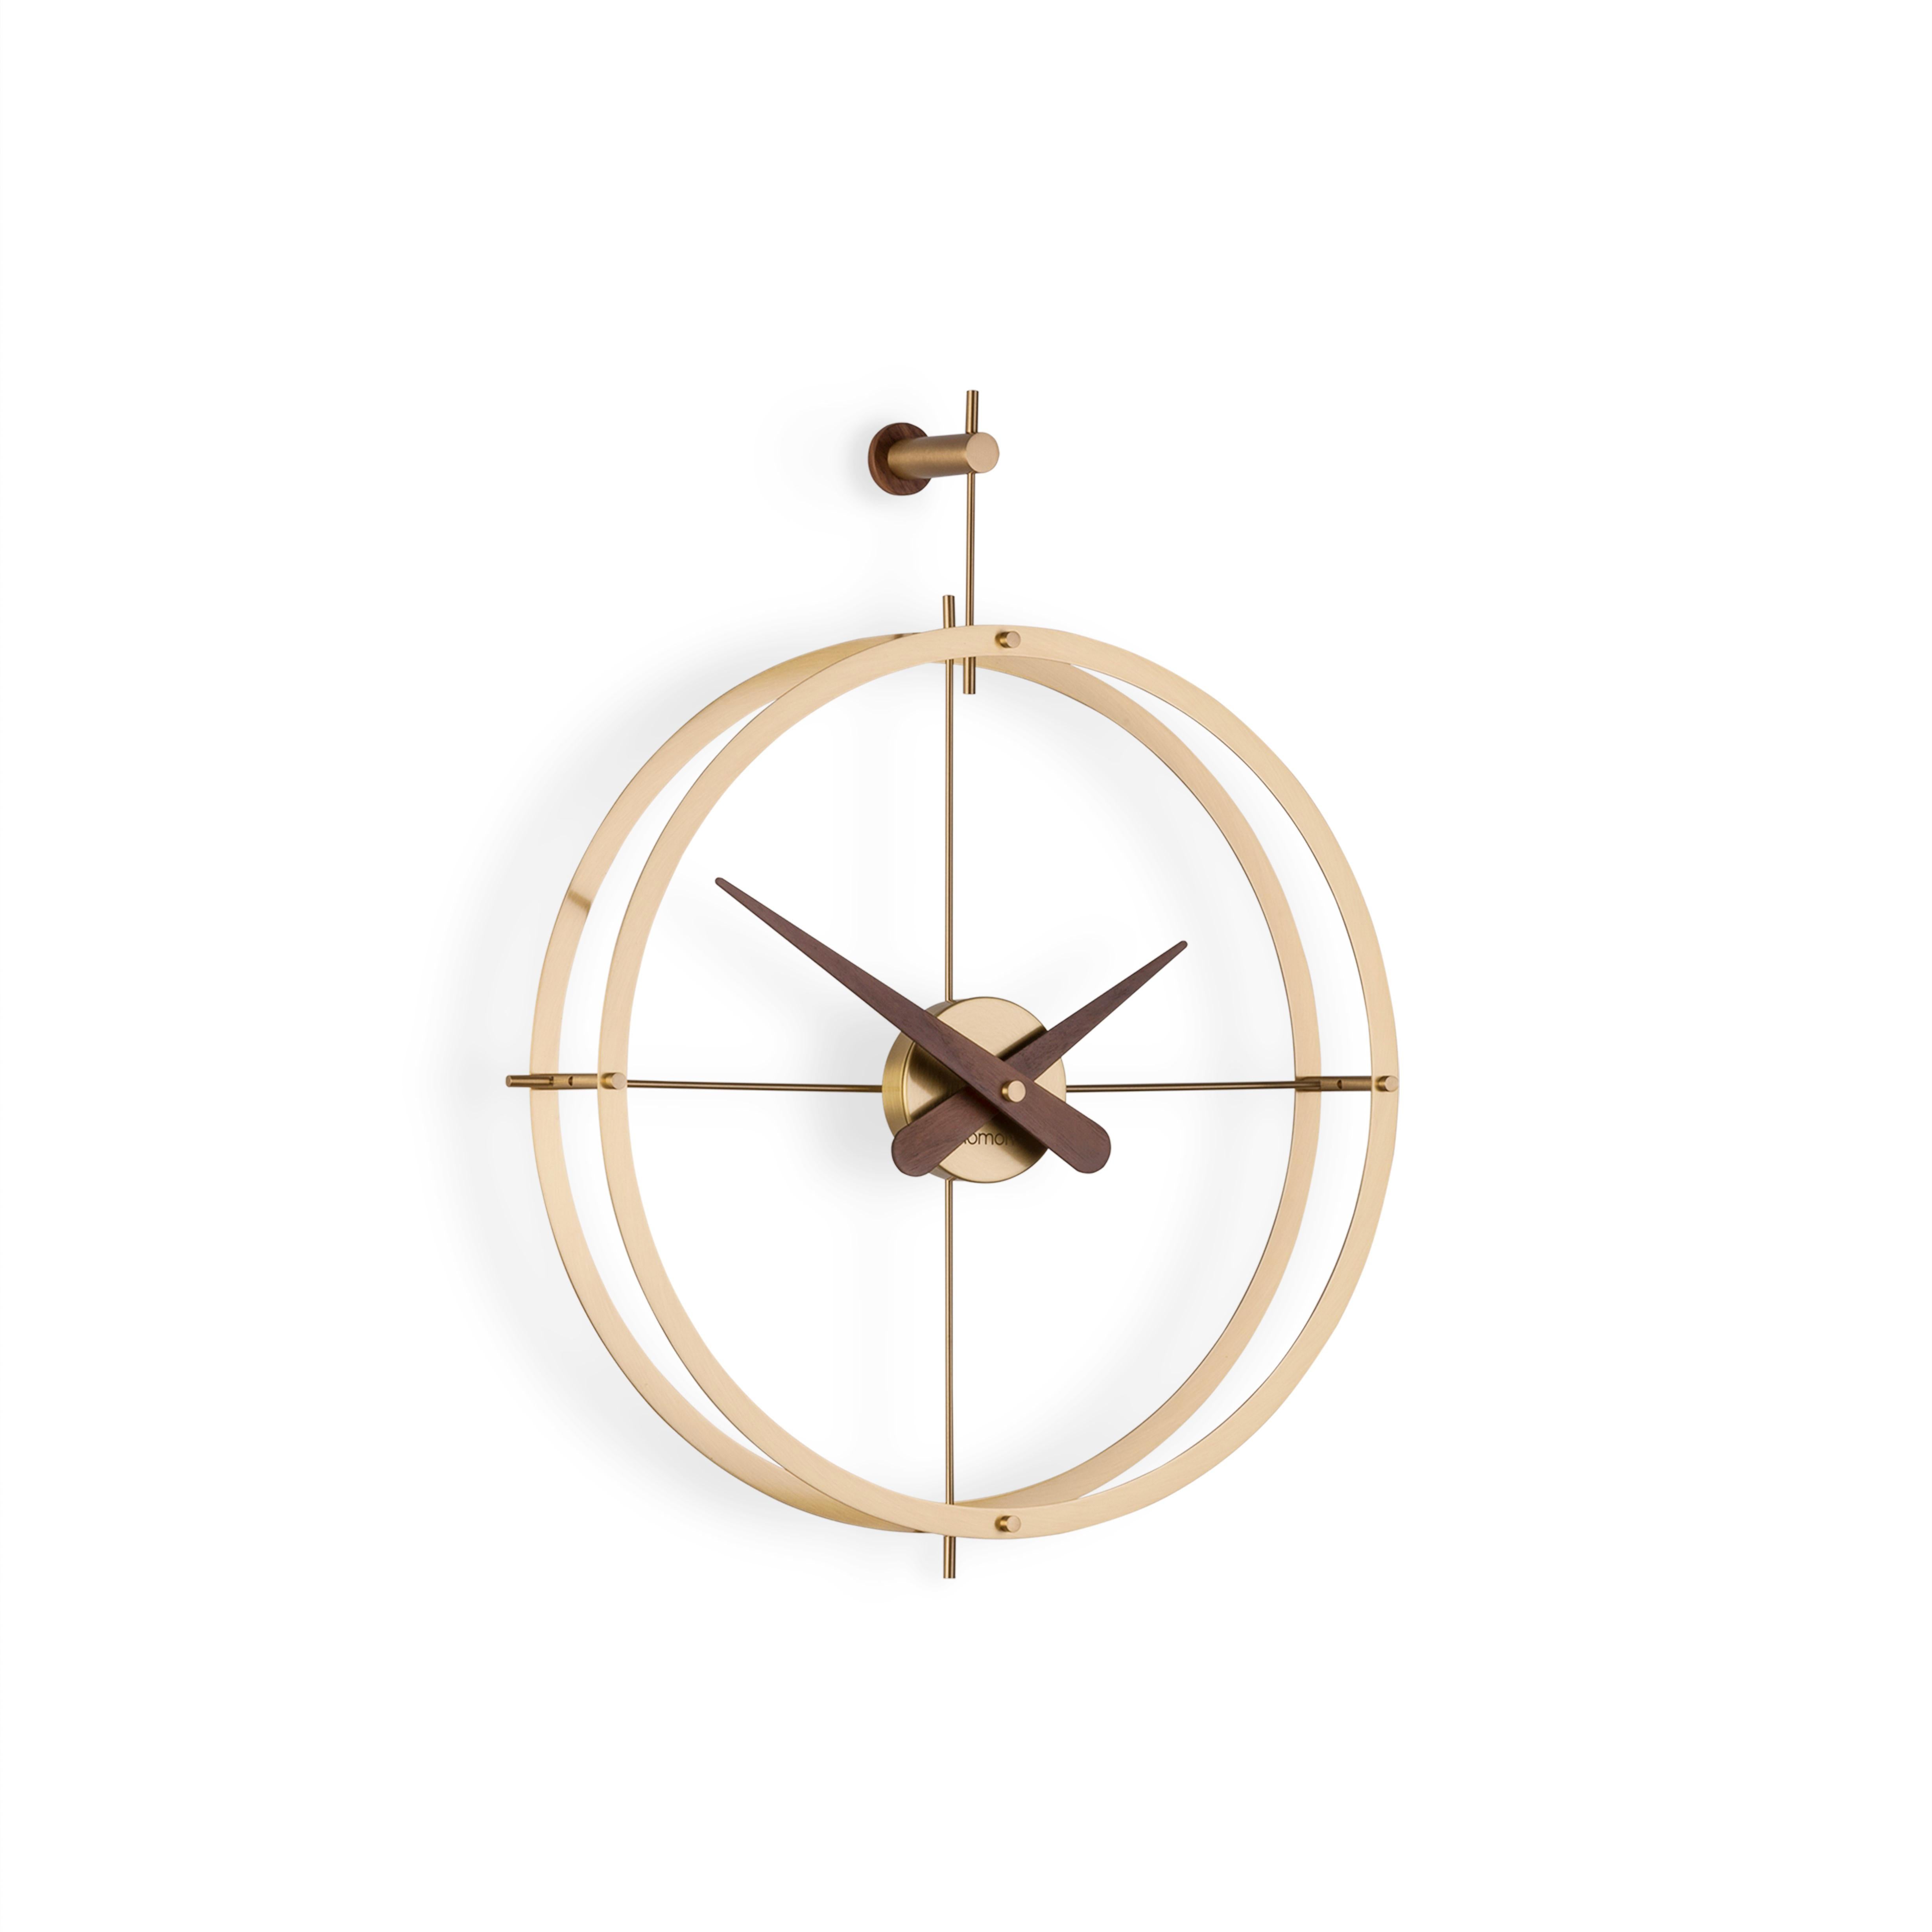 Clock that exudes elegance and sophistication, with rings made of polished brass, combined with hands in natural walnut wood.

Rings and central box in polished brass, hands in walnut wood.